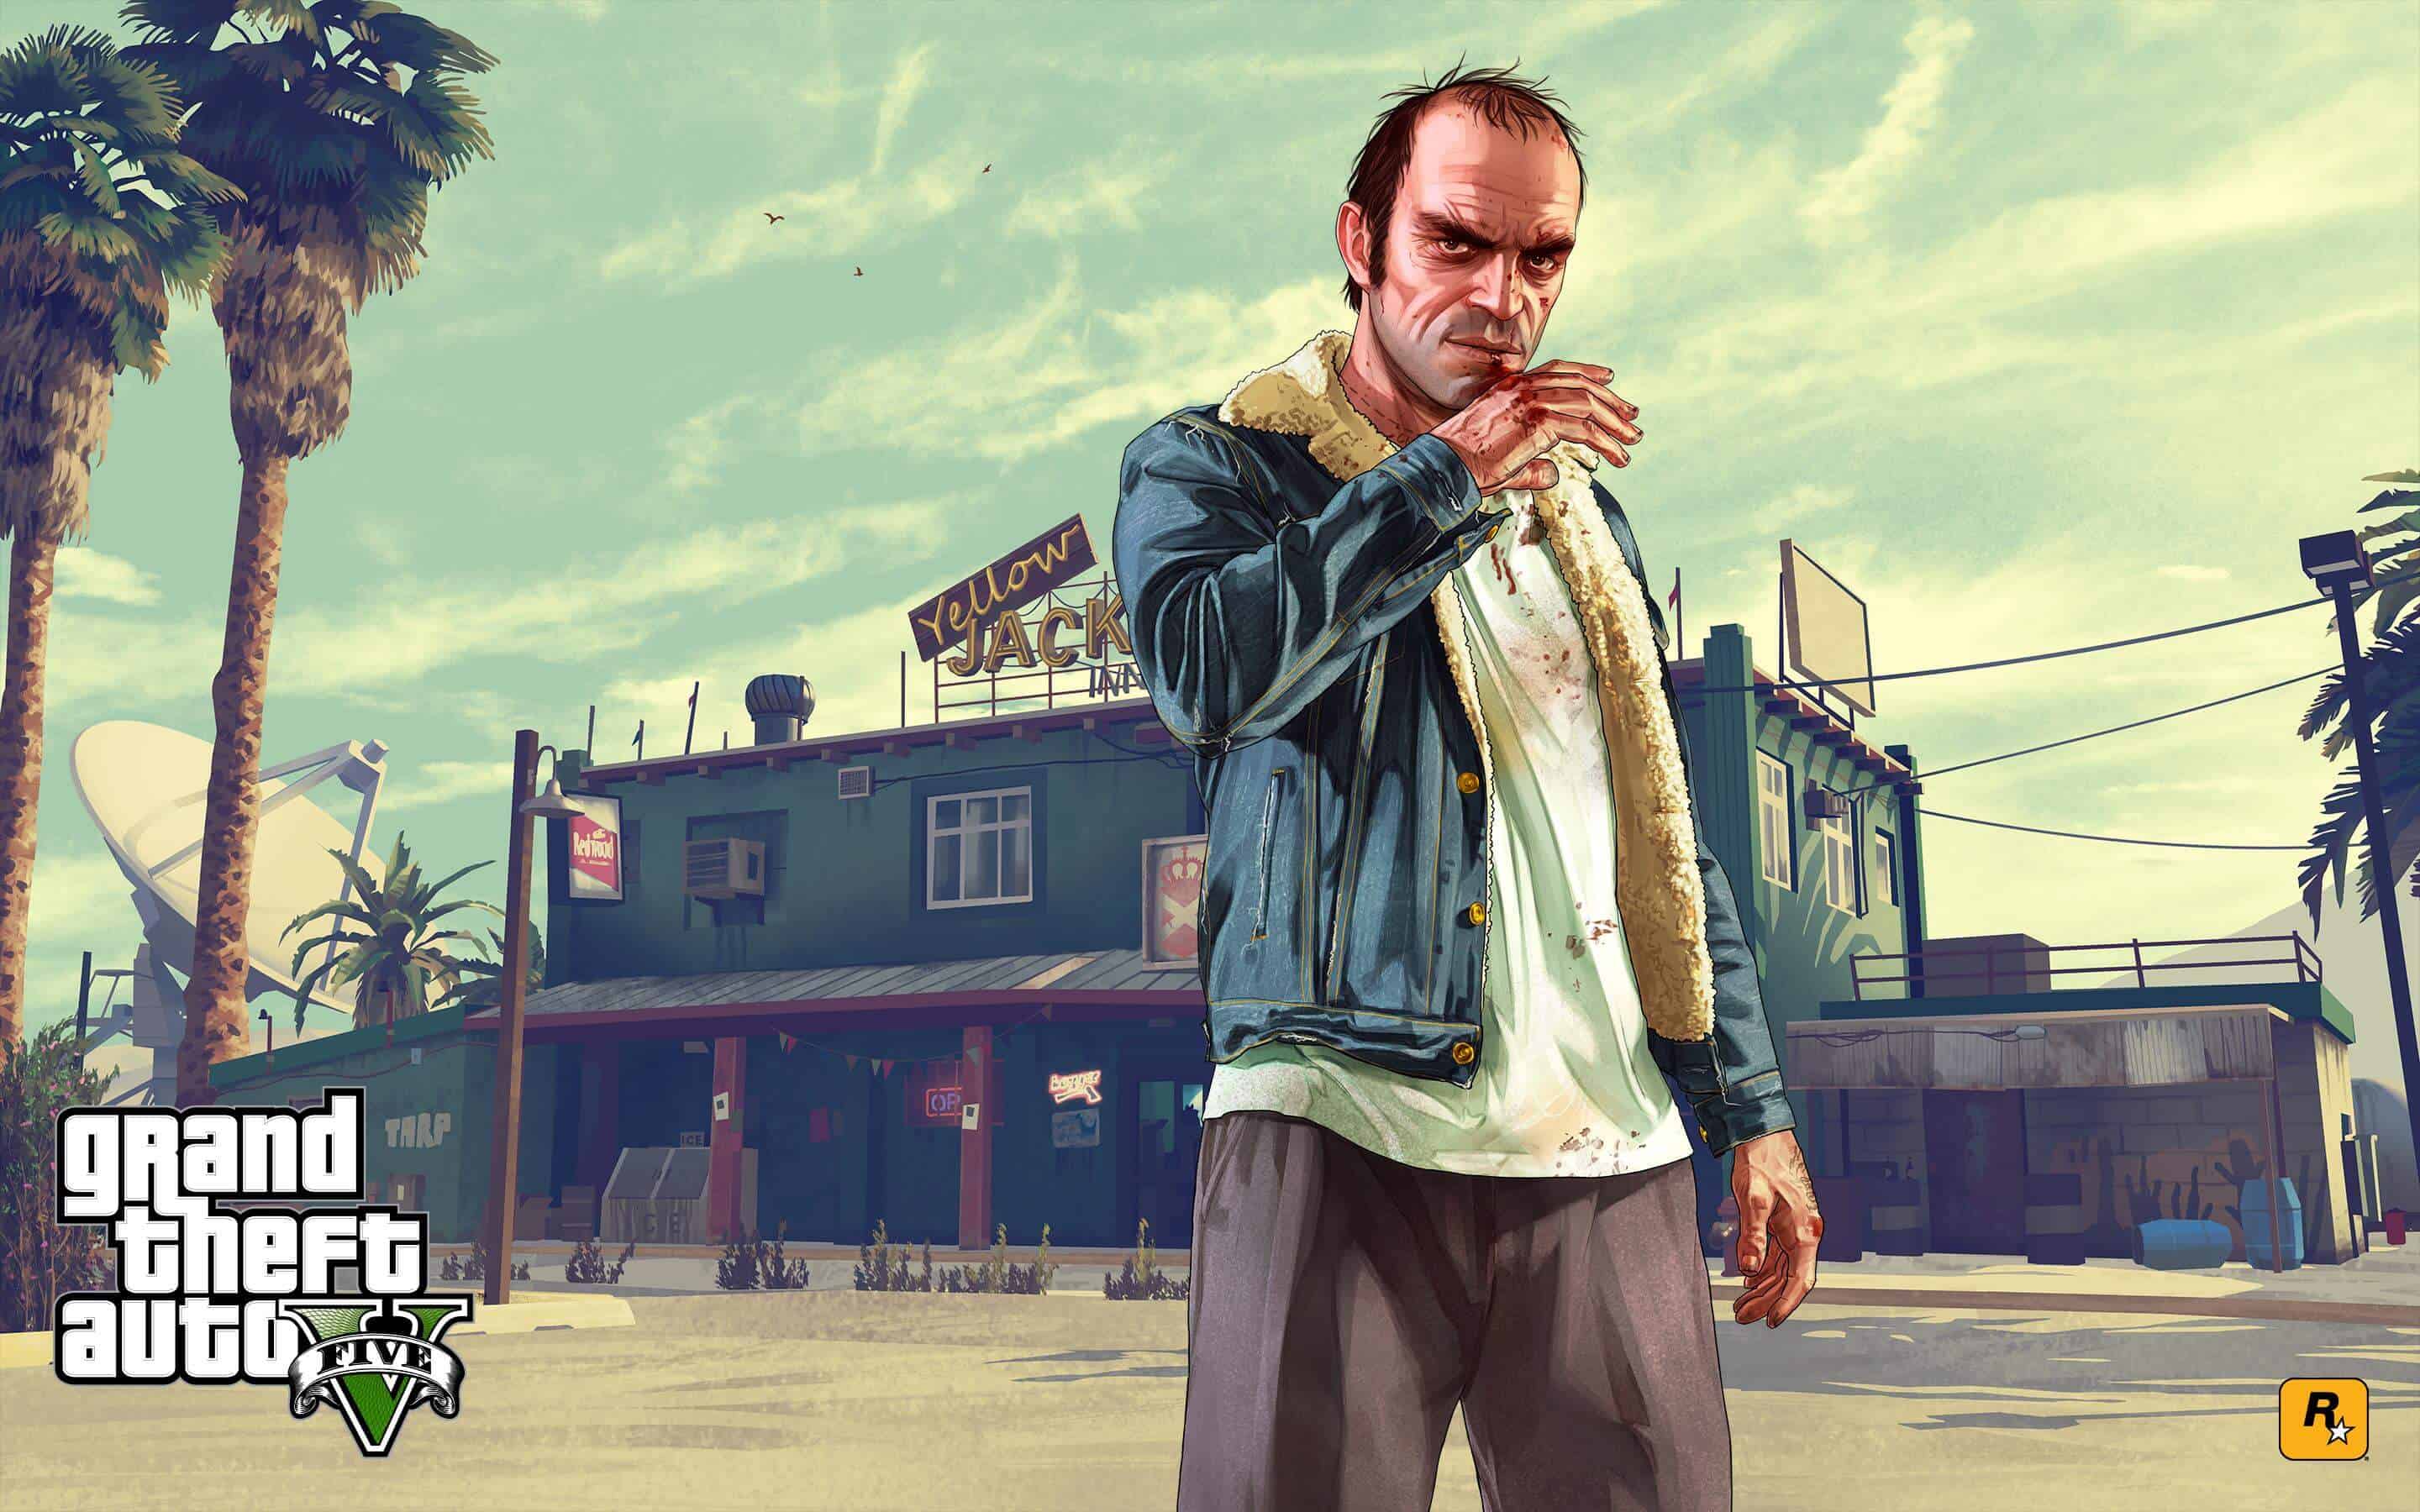 Developer of GTA 5 mod that lets you chat to AI NPCs says it's been removed  by Take-Two